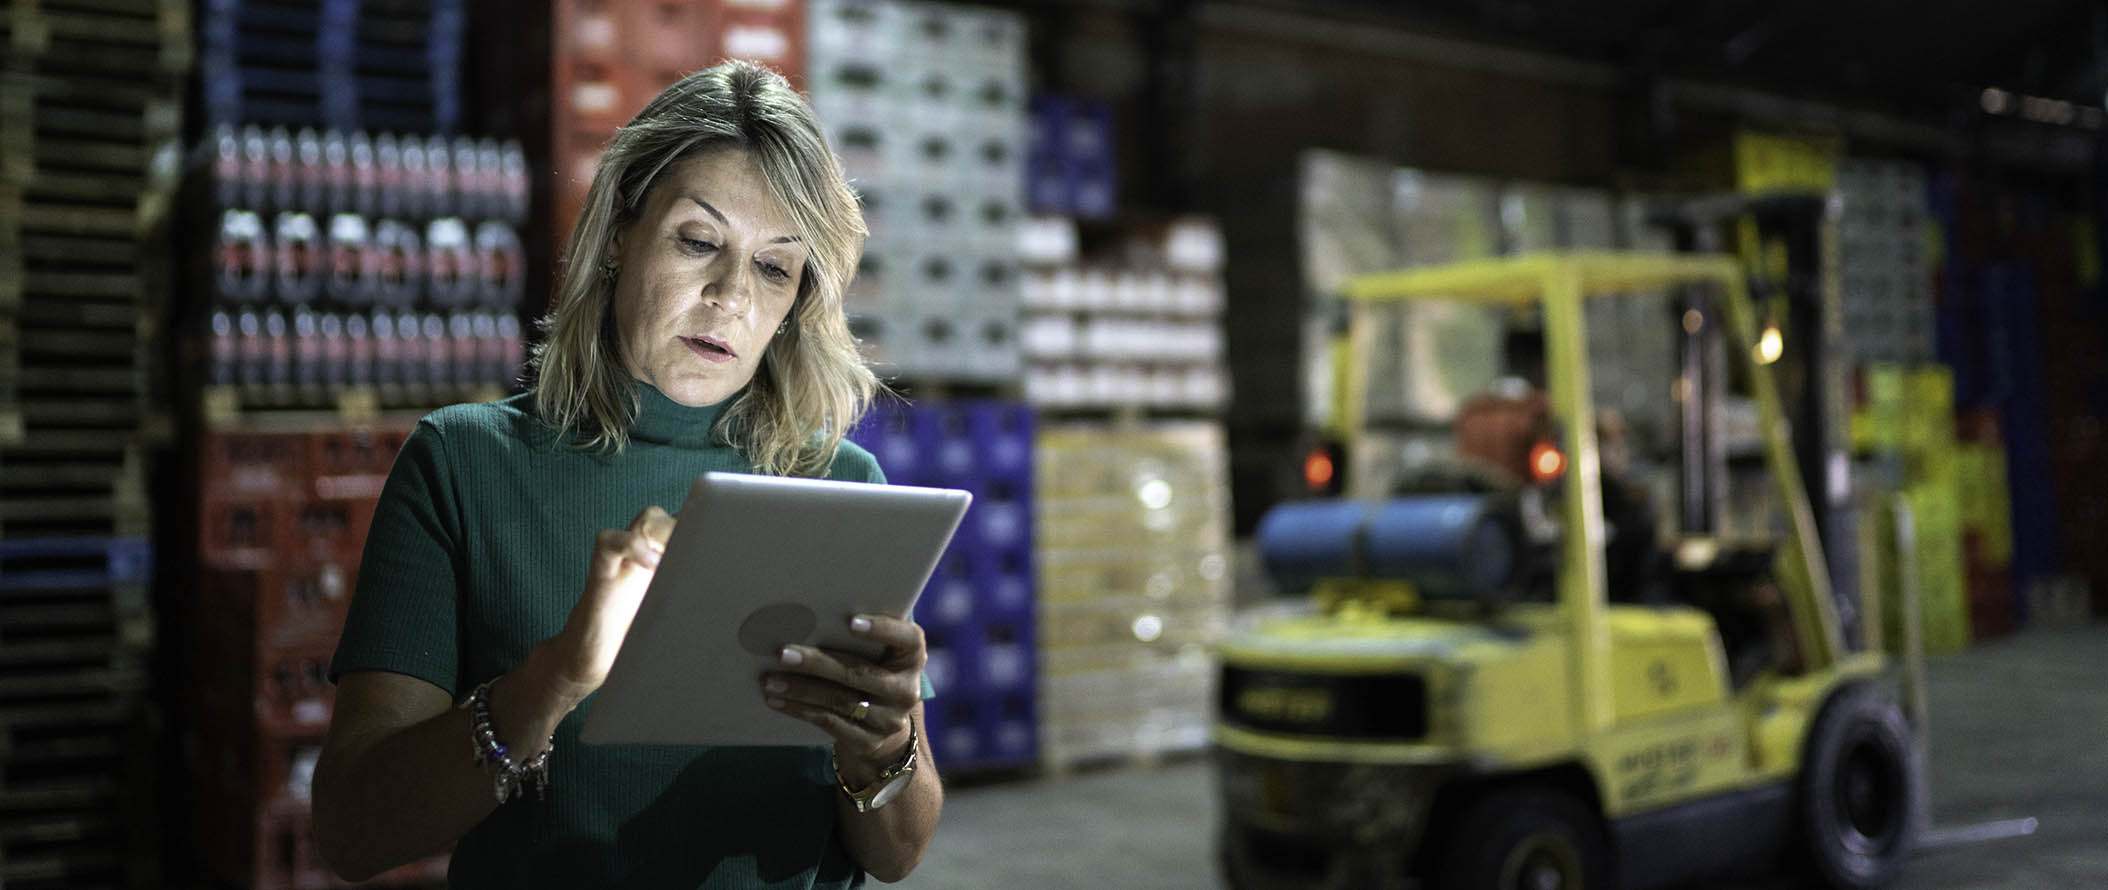 banner-dist-woman-working-with-tablet-on-warehouse.jpg